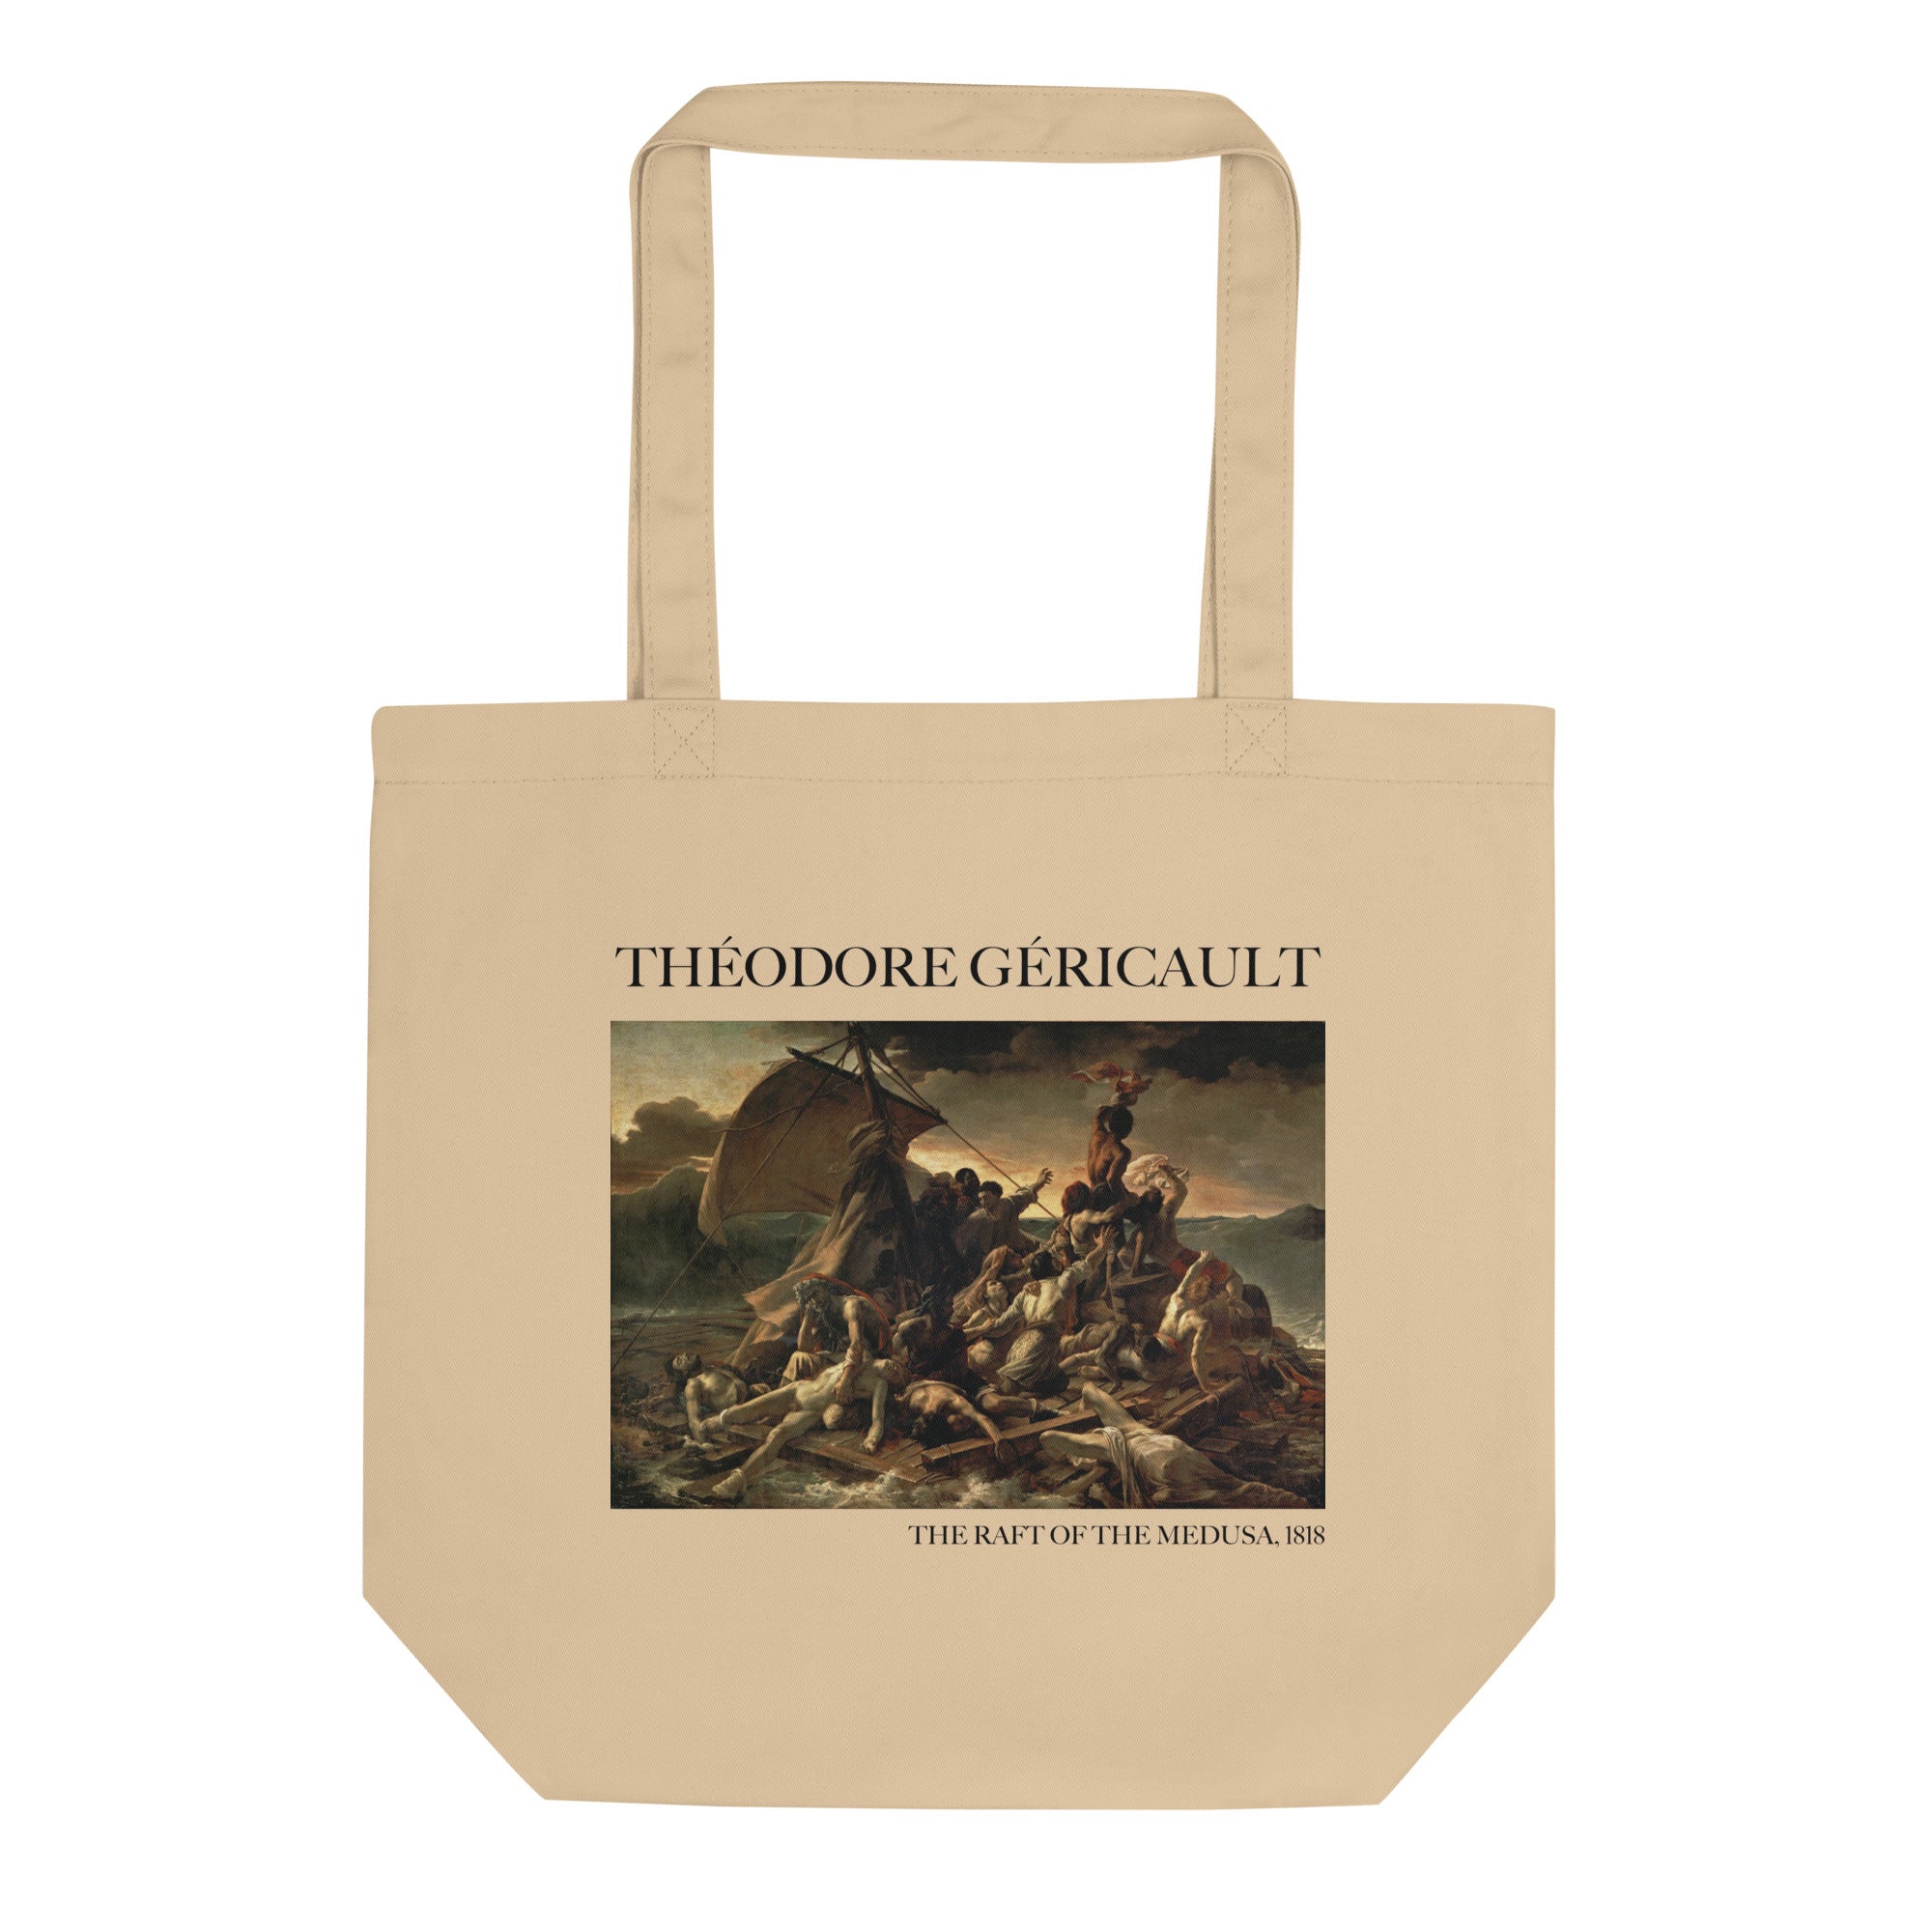 Théodore Géricault 'The Raft of the Medusa' Famous Painting Totebag | Eco Friendly Art Tote Bag